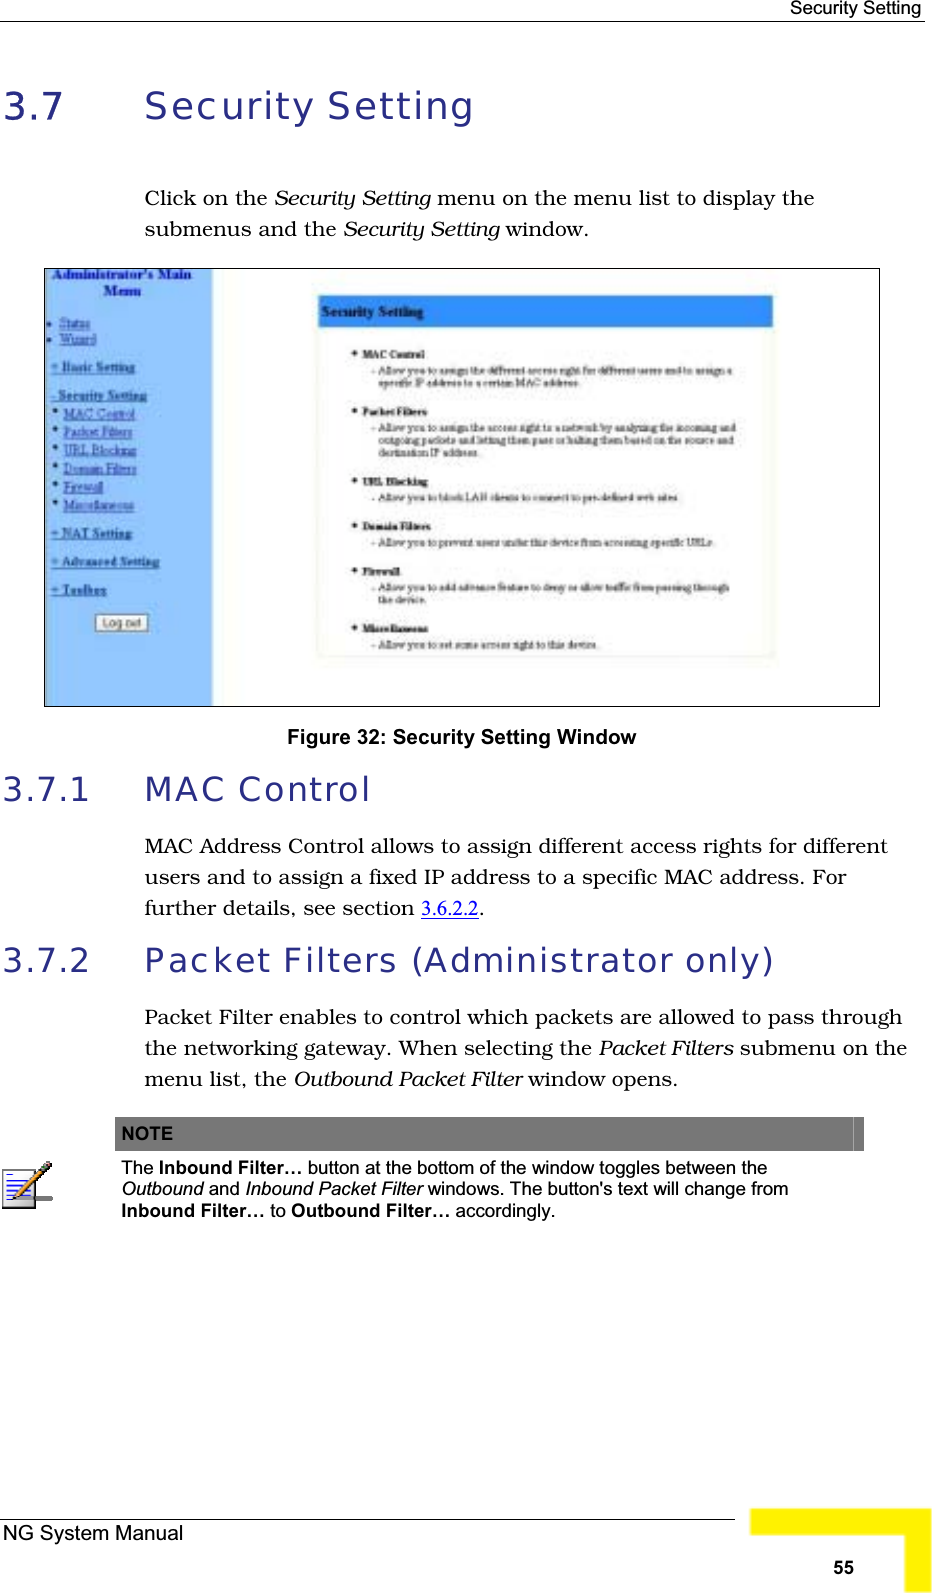 Security Setting 3.7 Security Setting Click on the Security Setting menu on the menu list to display thesubmenus and the Security Setting window.Figure 32: Security Setting Window3.7.1 MAC ControlMAC Address Control allows to assign different access rights for differentusers and to assign a fixed IP address to a specific MAC address. For further details, see section 3.6.2.2.3.7.2 Packet Filters (Administrator only) Packet Filter enables to control which packets are allowed to pass throughthe networking gateway. When selecting the Packet Filters submenu on themenu list, the Outbound Packet Filter window opens.NOTEThe Inbound Filter… button at the bottom of the window toggles between theOutbound and Inbound Packet Filter windows. The button&apos;s text will change from Inbound Filter… to Outbound Filter… accordingly.NG System Manual55